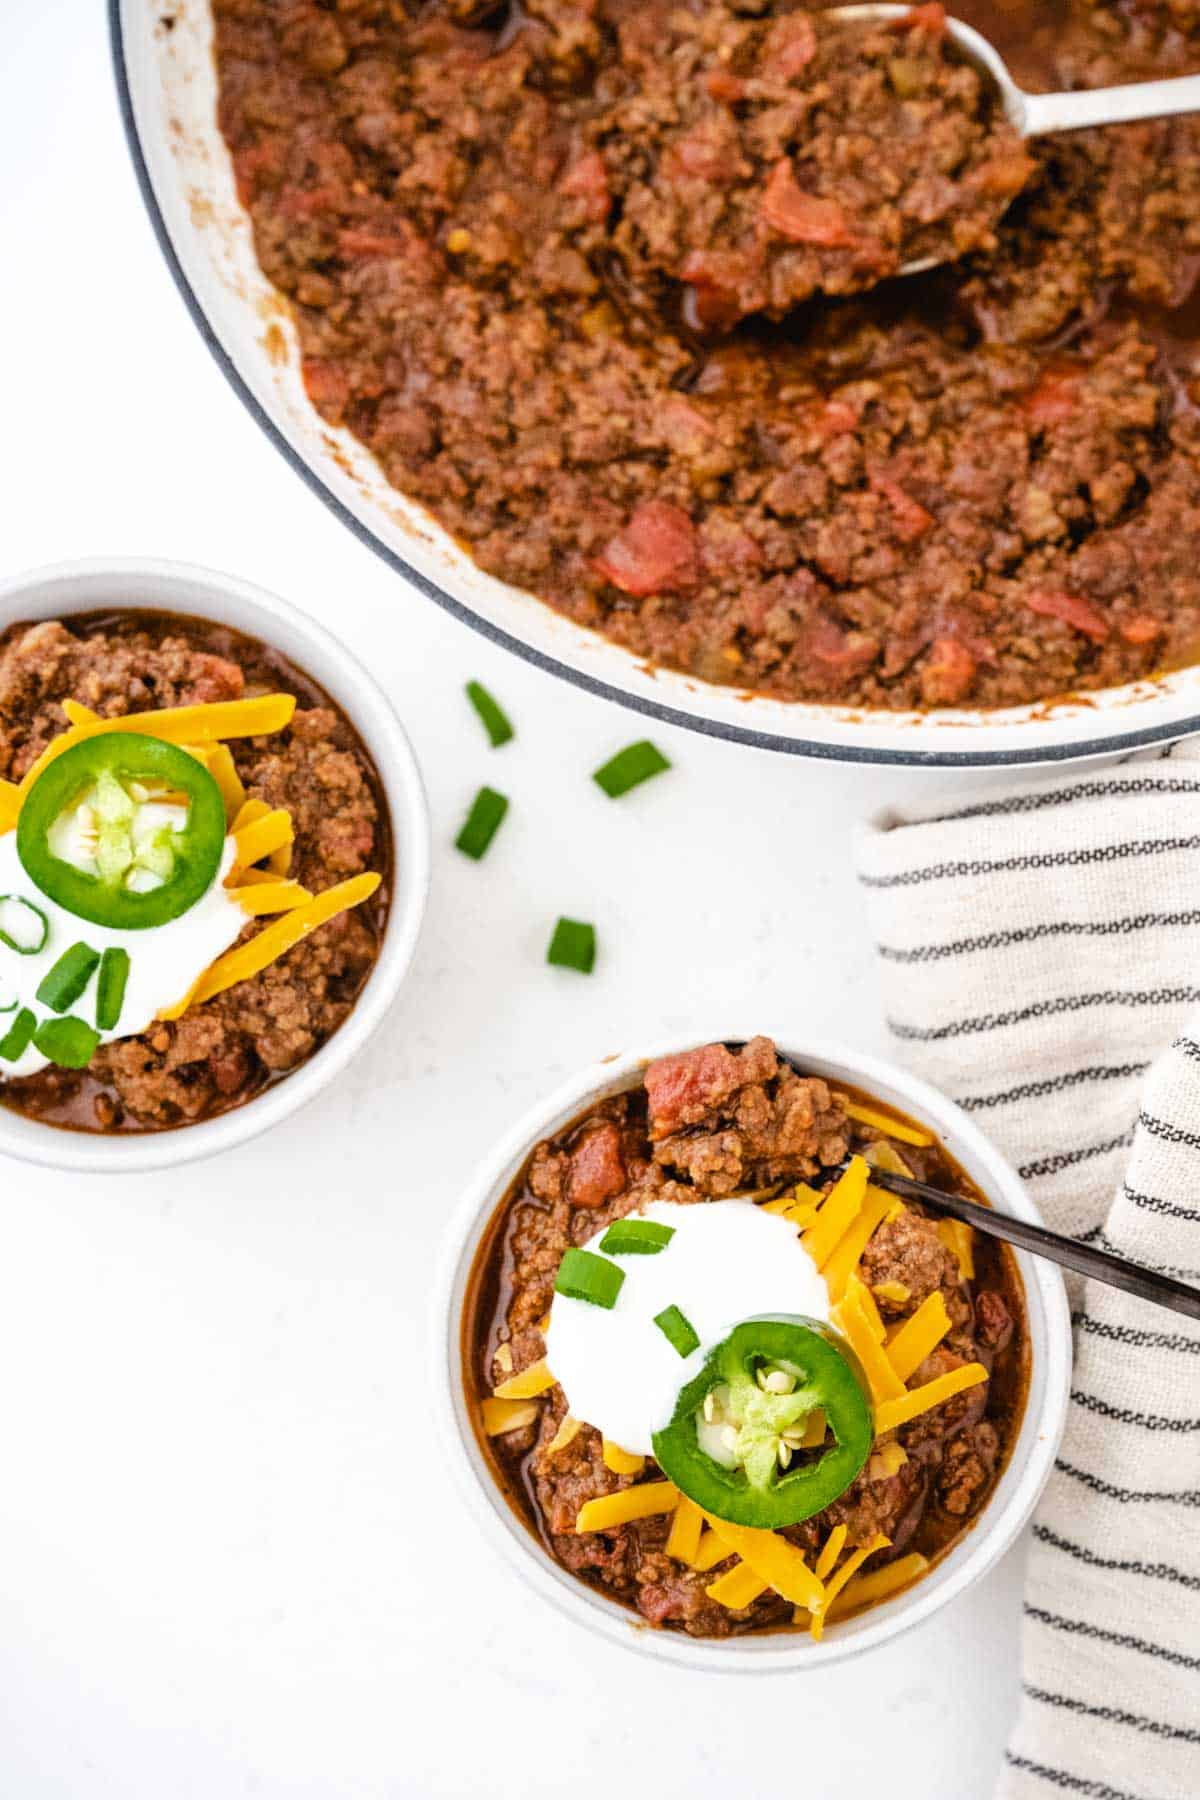 Low Carb Keto Chili with Groun Beef, Sour Cream, Bell Peppers and Shredded Cheese